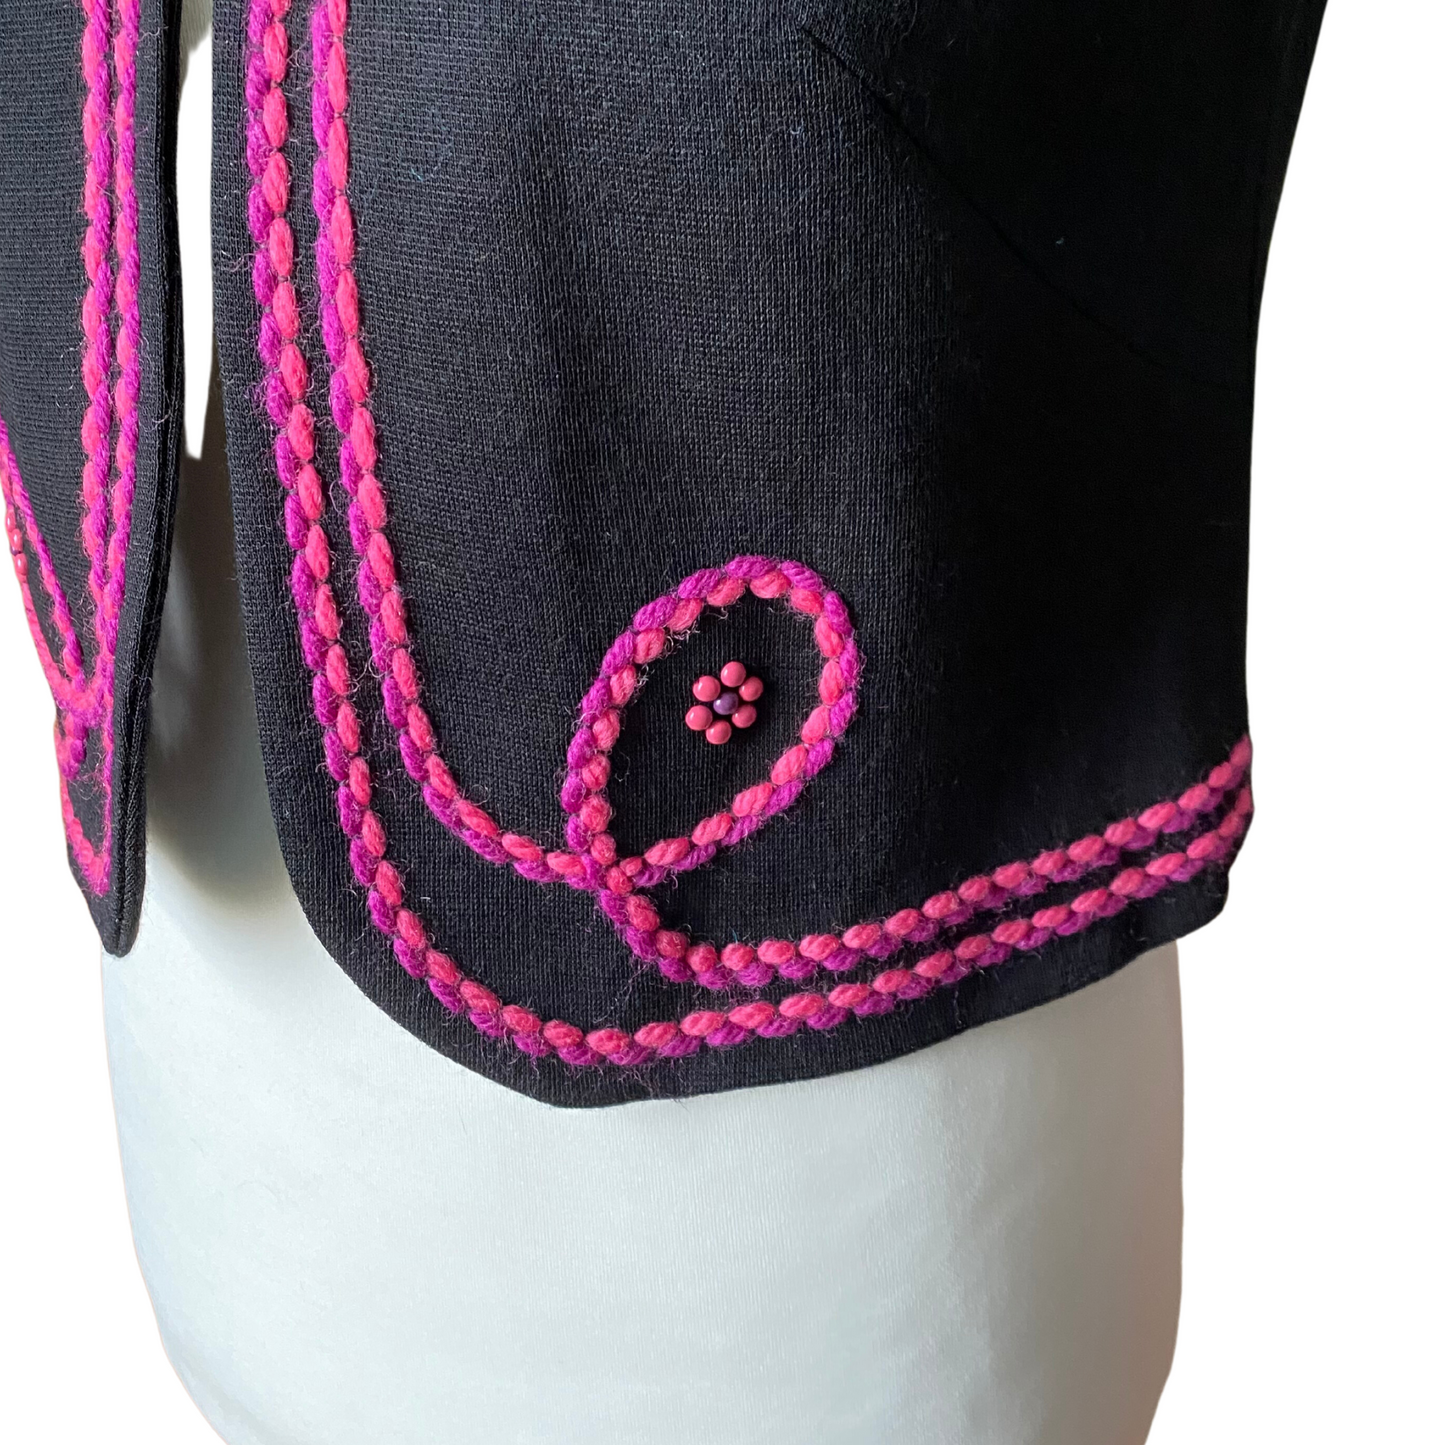 A vintage black waistcoat with 70s flair, highlighted by vibrant pink and purple stitching and intricate beaded flower details.